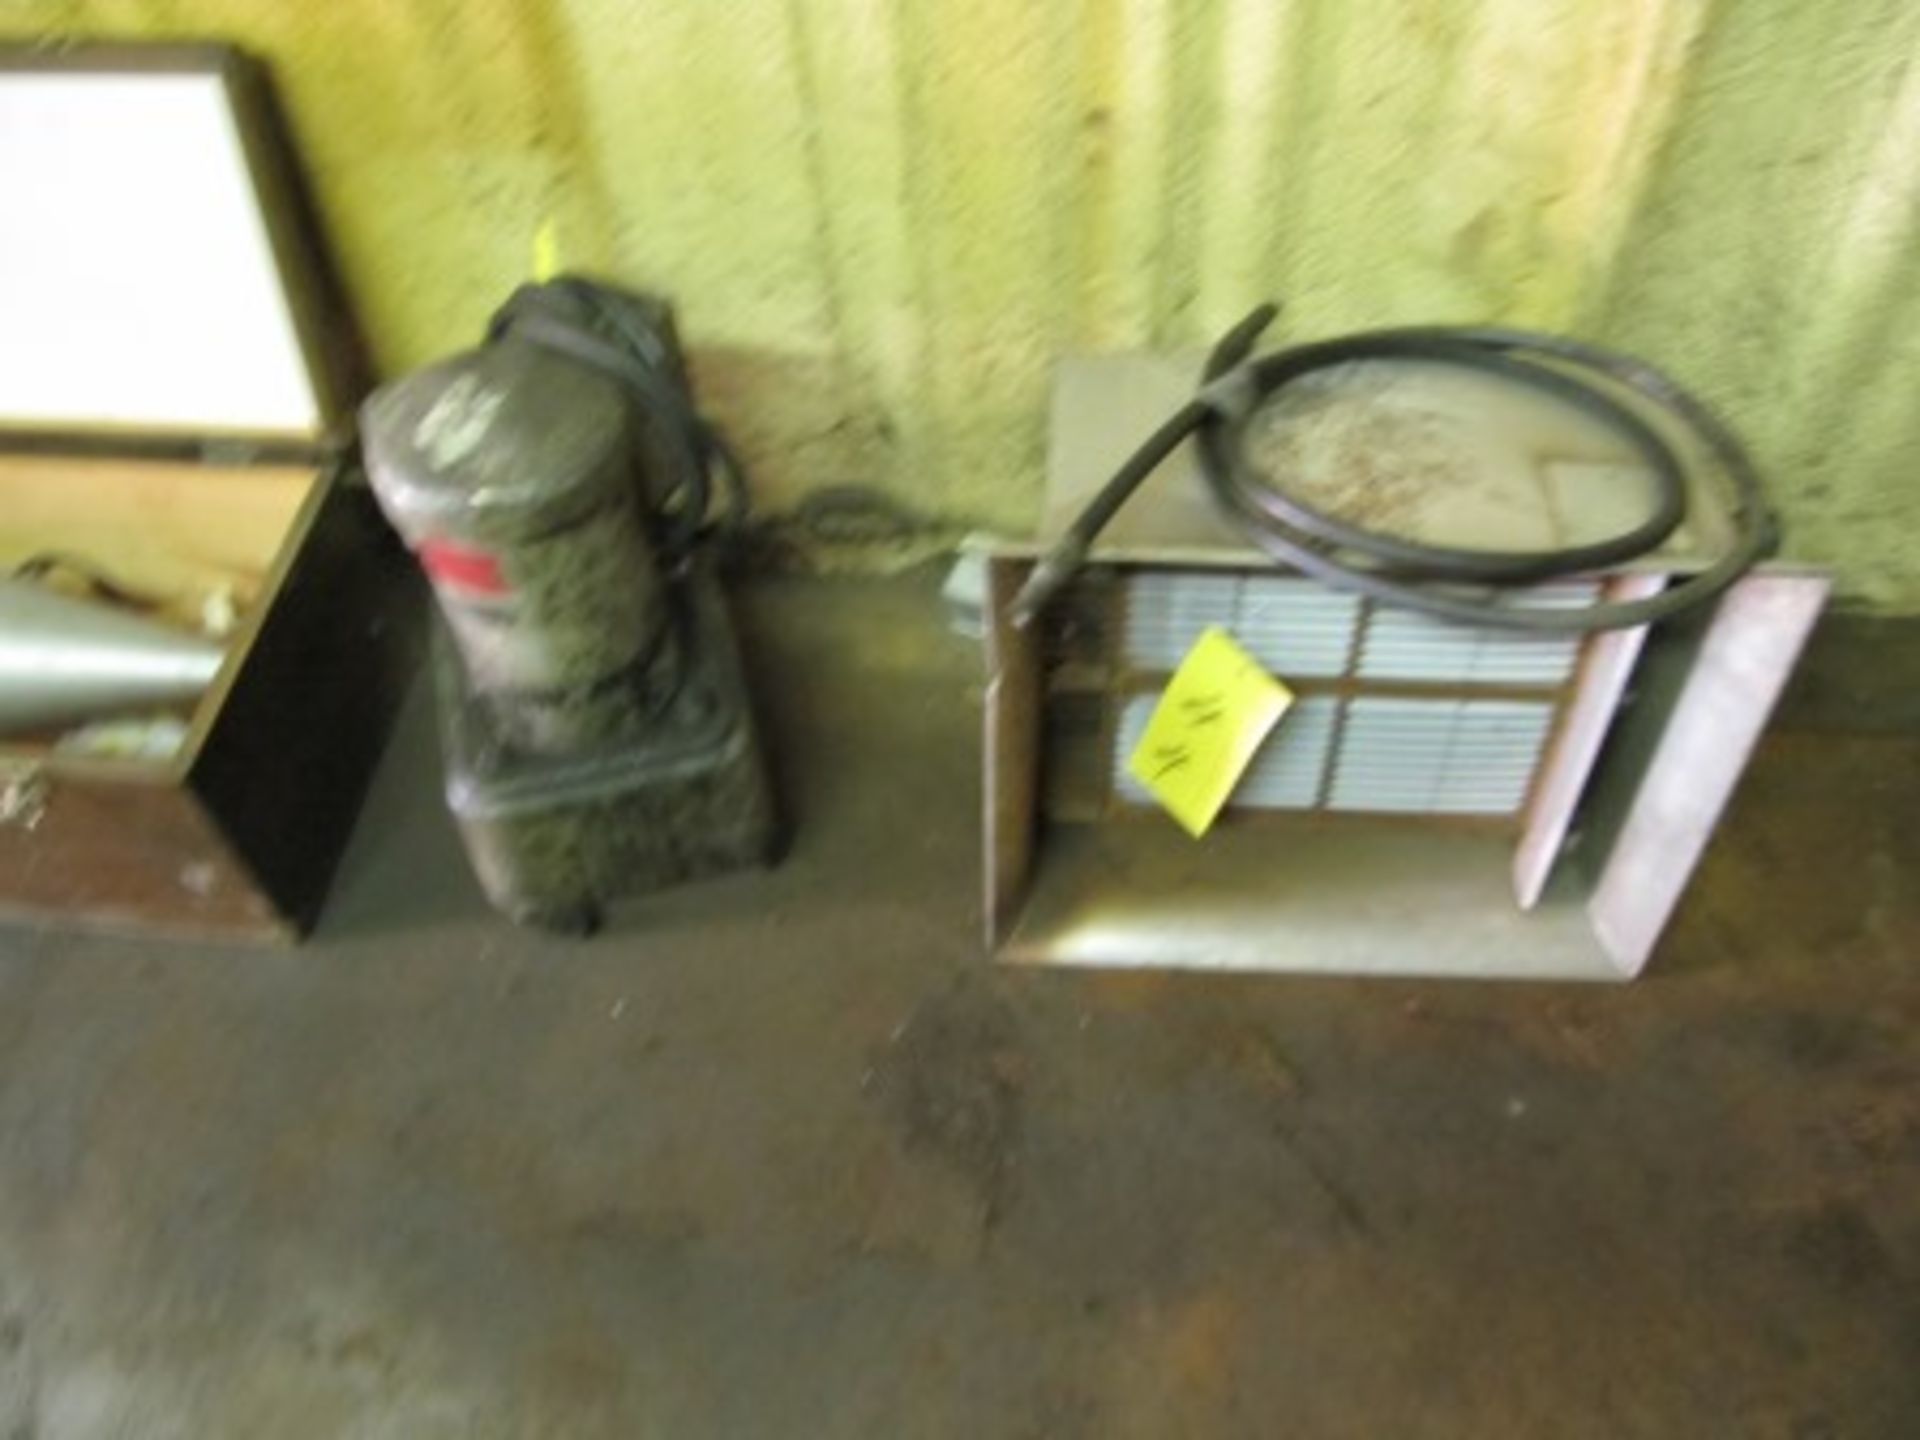 LOT ASST. RE-VERBER-RAY NATURAL GAS RADIANT HEATER, HYDRAULIC PUMP